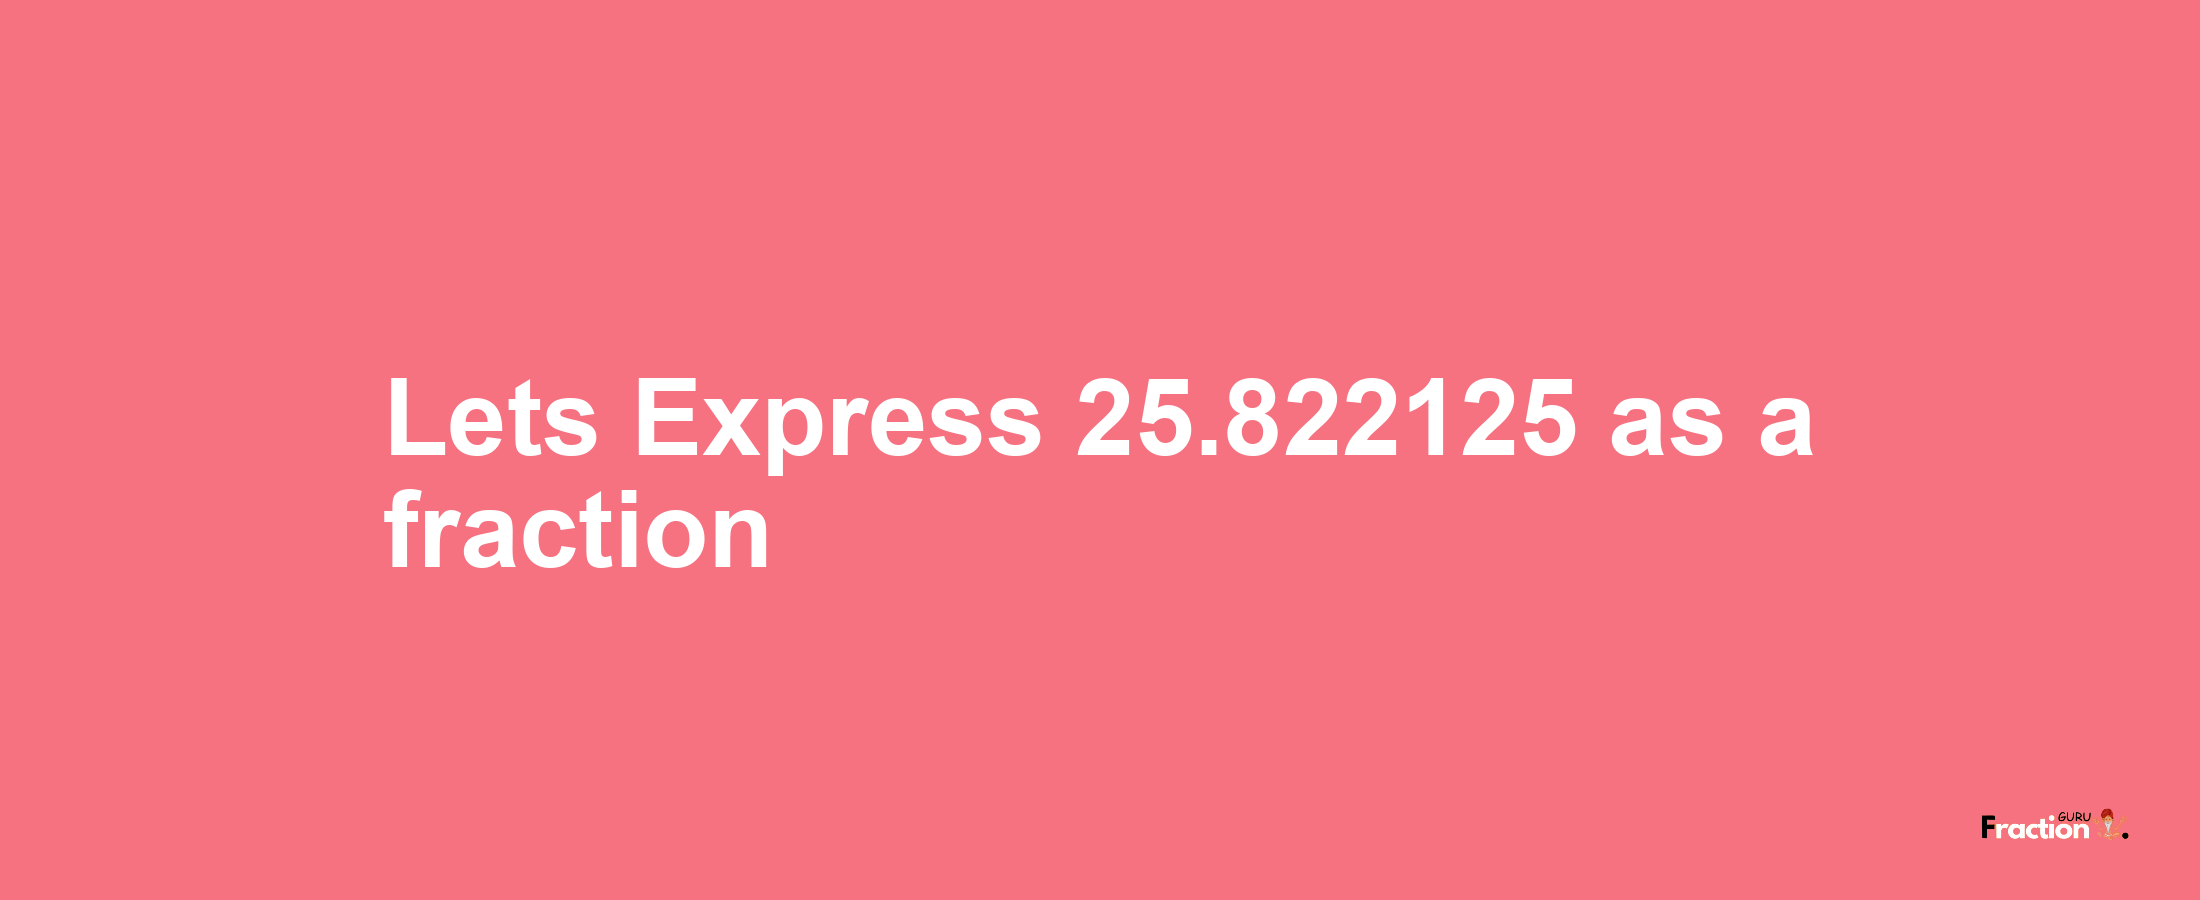 Lets Express 25.822125 as afraction